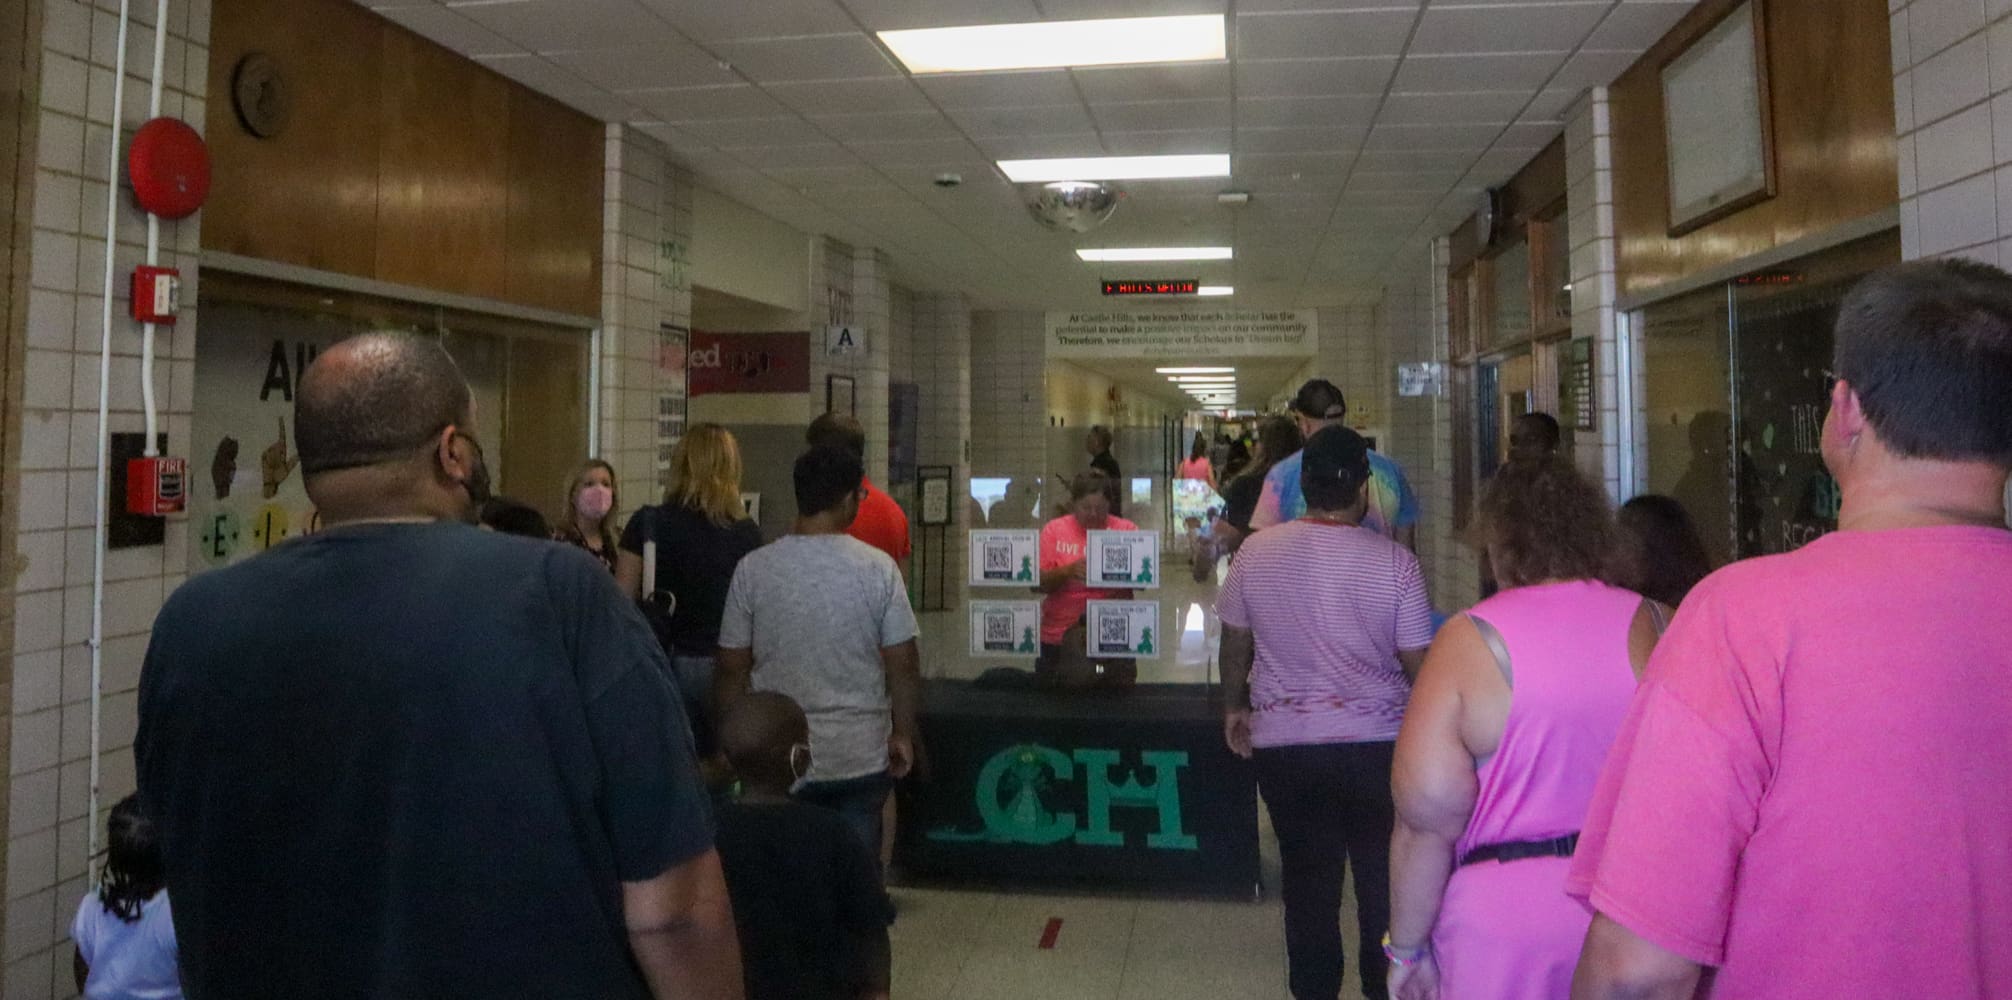 Families were able to tour their child's school and classroom.